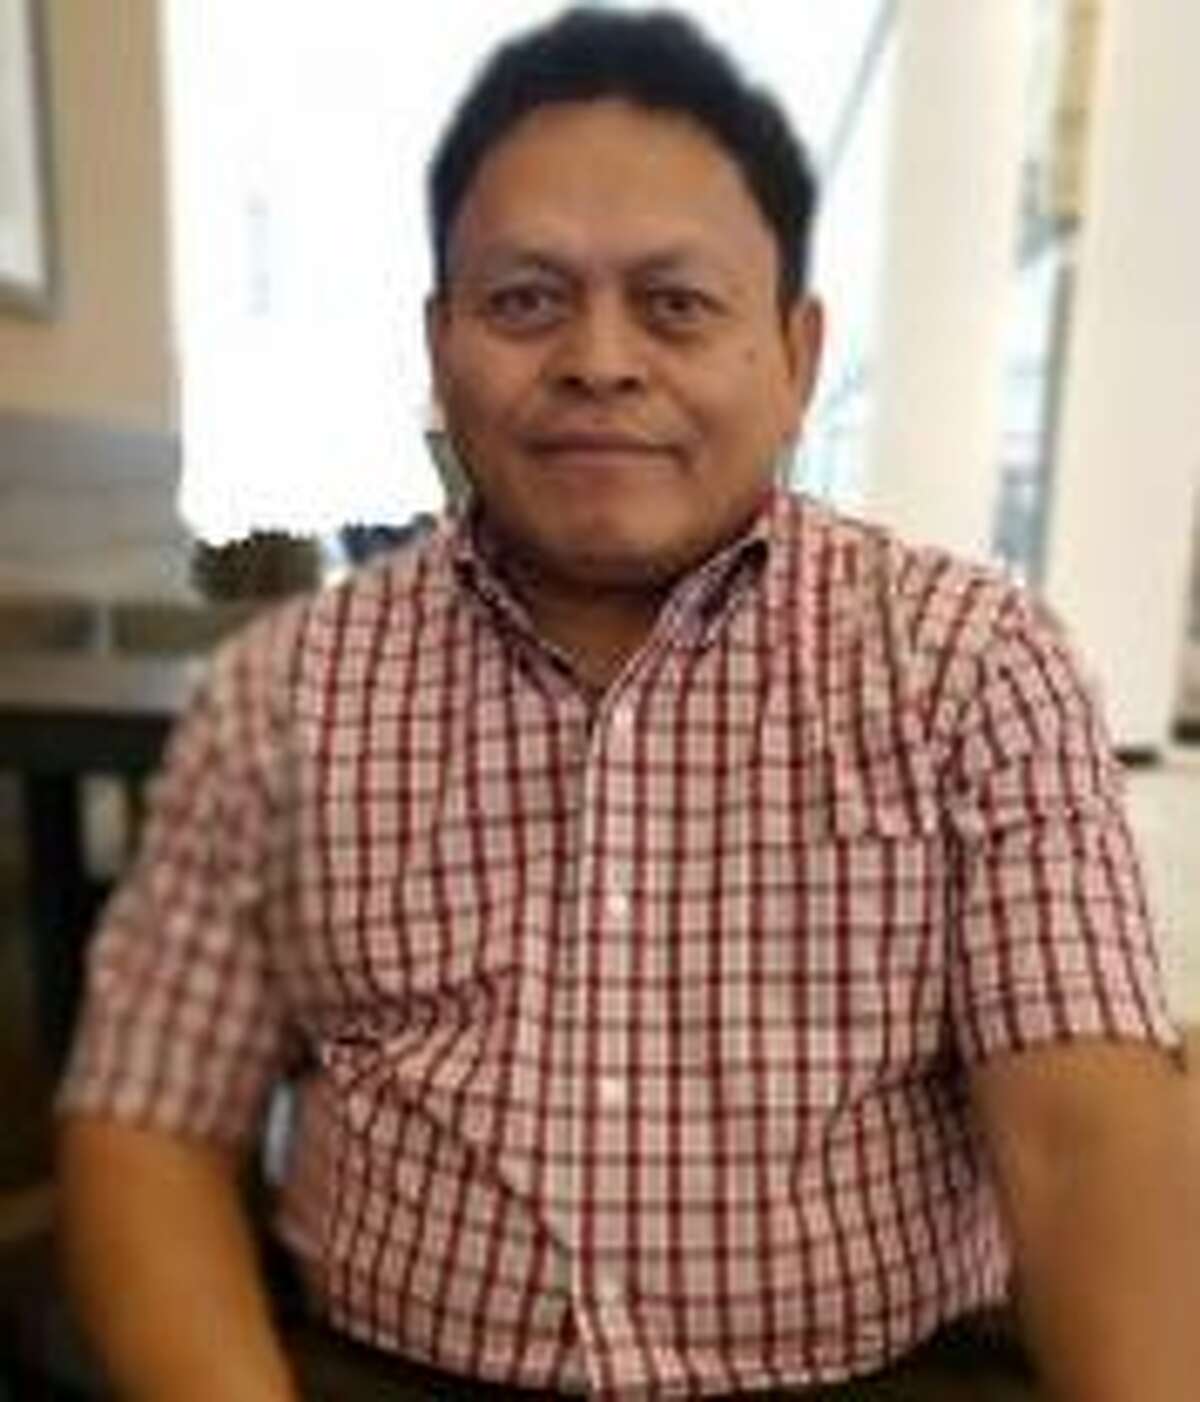 Magdaleno Reyes was a 59-year-old Hispanic man who died February 11, 2019 from a gunshot wound at 7298 T C Jester Blvd, Houston.